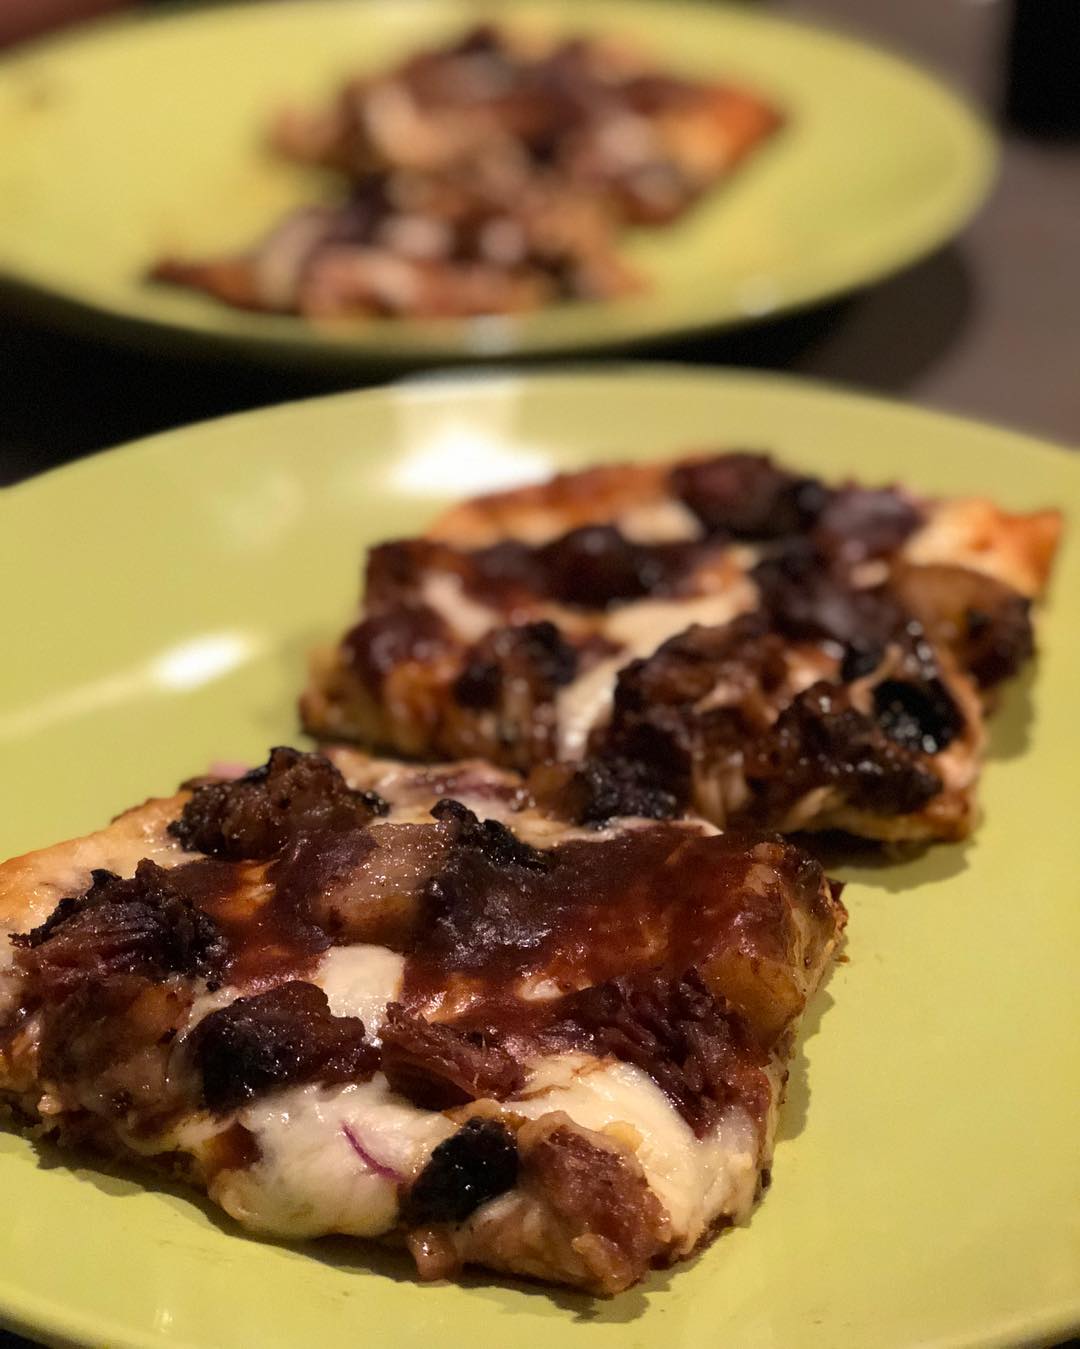 Keto BBQ Brisket Pizza!!! Omg I can’t get over how amazing this came out!
—-
I didn’t have time or desire to create the make the brisket so I went to my local barbecue spot and ordered brisket burnt ends without any sauce on them. I went home and I created a cauliflower crust which was super easy to do, recipe below! I spread the @ghughessugarfree hickory BBQ sauce on the crust, red onions, and layered mozzarella cheese on it, then put the brisket on top and drizzled BBQ sauce over it… in the oven at 400 for about 10 minutes (it was already hot from cooking the crust!!)
—-
2lbs cauliflower, riced (use a food processor)
1/3 cup goat cheese
1 egg beaten
1 tsp dried oregano
Pinch of Salt
A bit of coconut flour as needed
—
Preheat the oven to 400 and then run your cauliflower through the food processor.. Fill a large pot with an inch or so of water and drain into a fine mesh strainer. Transfer to a clean towel (I used a flour sack) and wring ALL THE WATER OUT!!! This is important for a crispy crust!! Be careful of burning your hands! Mix with the rest of the ingredients. Mine came out a bit wet so I added a little coconut flour to dry it out; but not to dough consistency, it was still a wet dough. Press out into pizza dough shape on parchment (not wax) paper using your hands; I made mine rectangular.. bake for 35-40 minutes until golden brown.. and then cover with toppings, slice and serve!!! Dang, you’re gonna love it